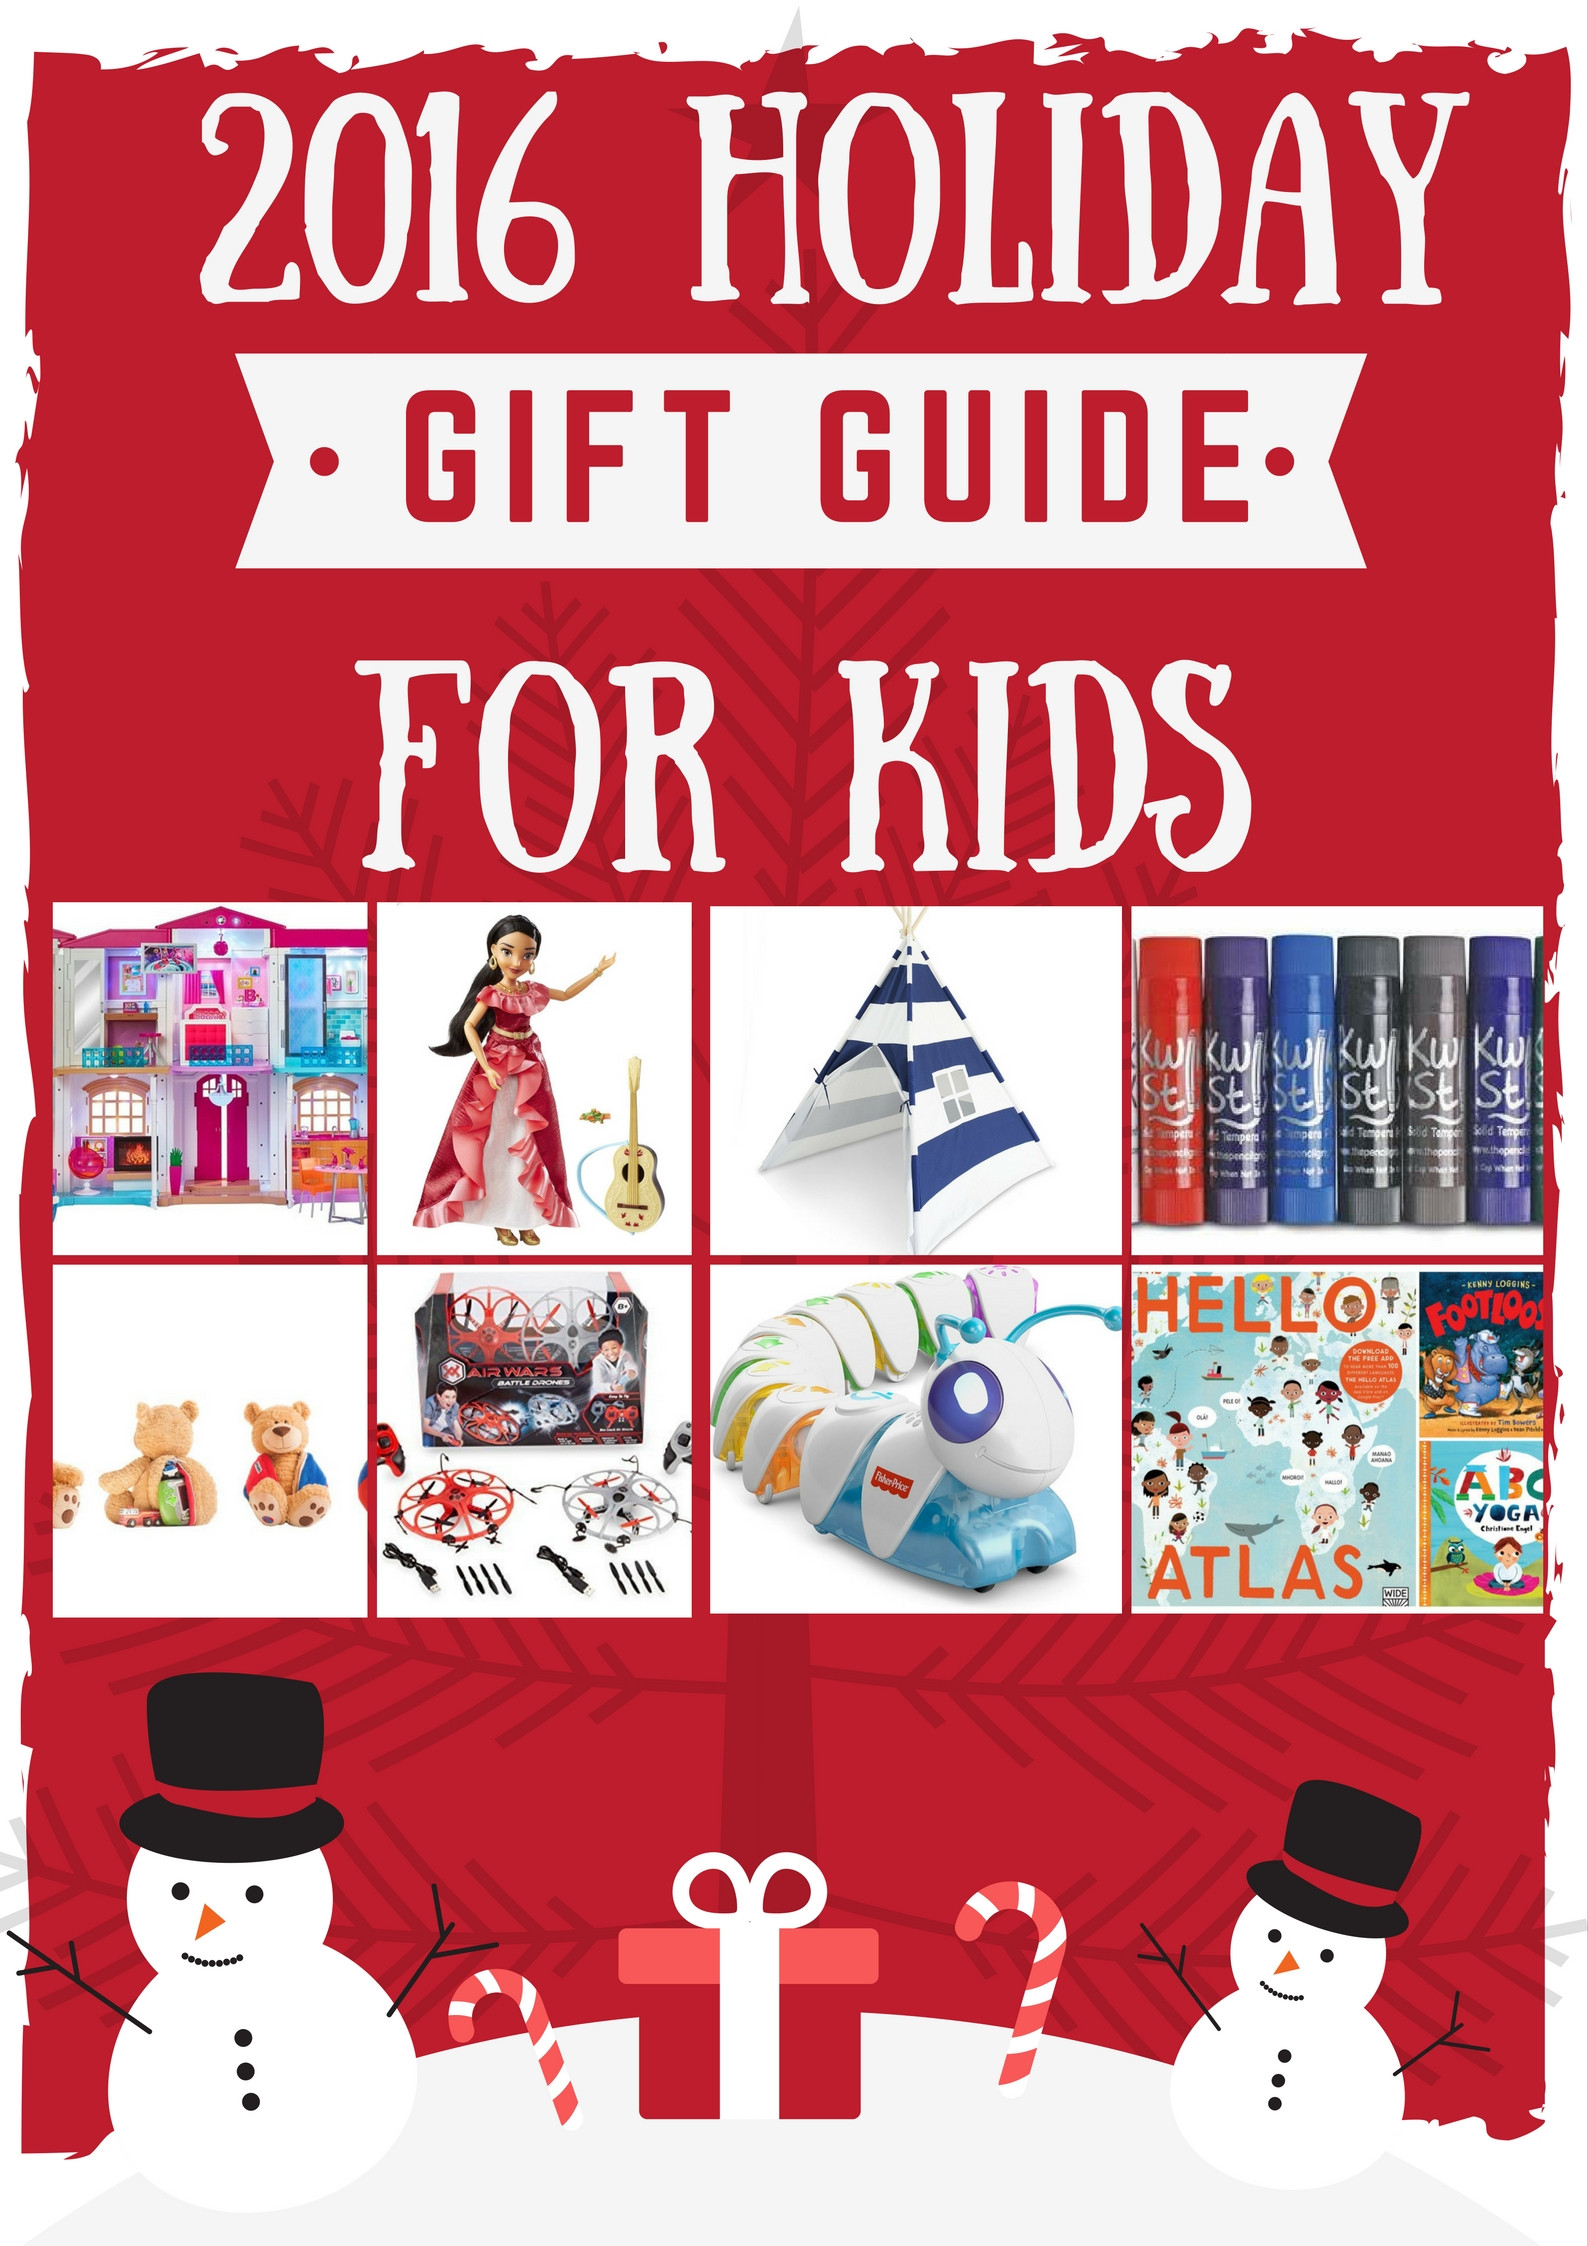 Holiday Gift Guide For Kids
 Holiday Gift Guide 2016 Gifts For Kids